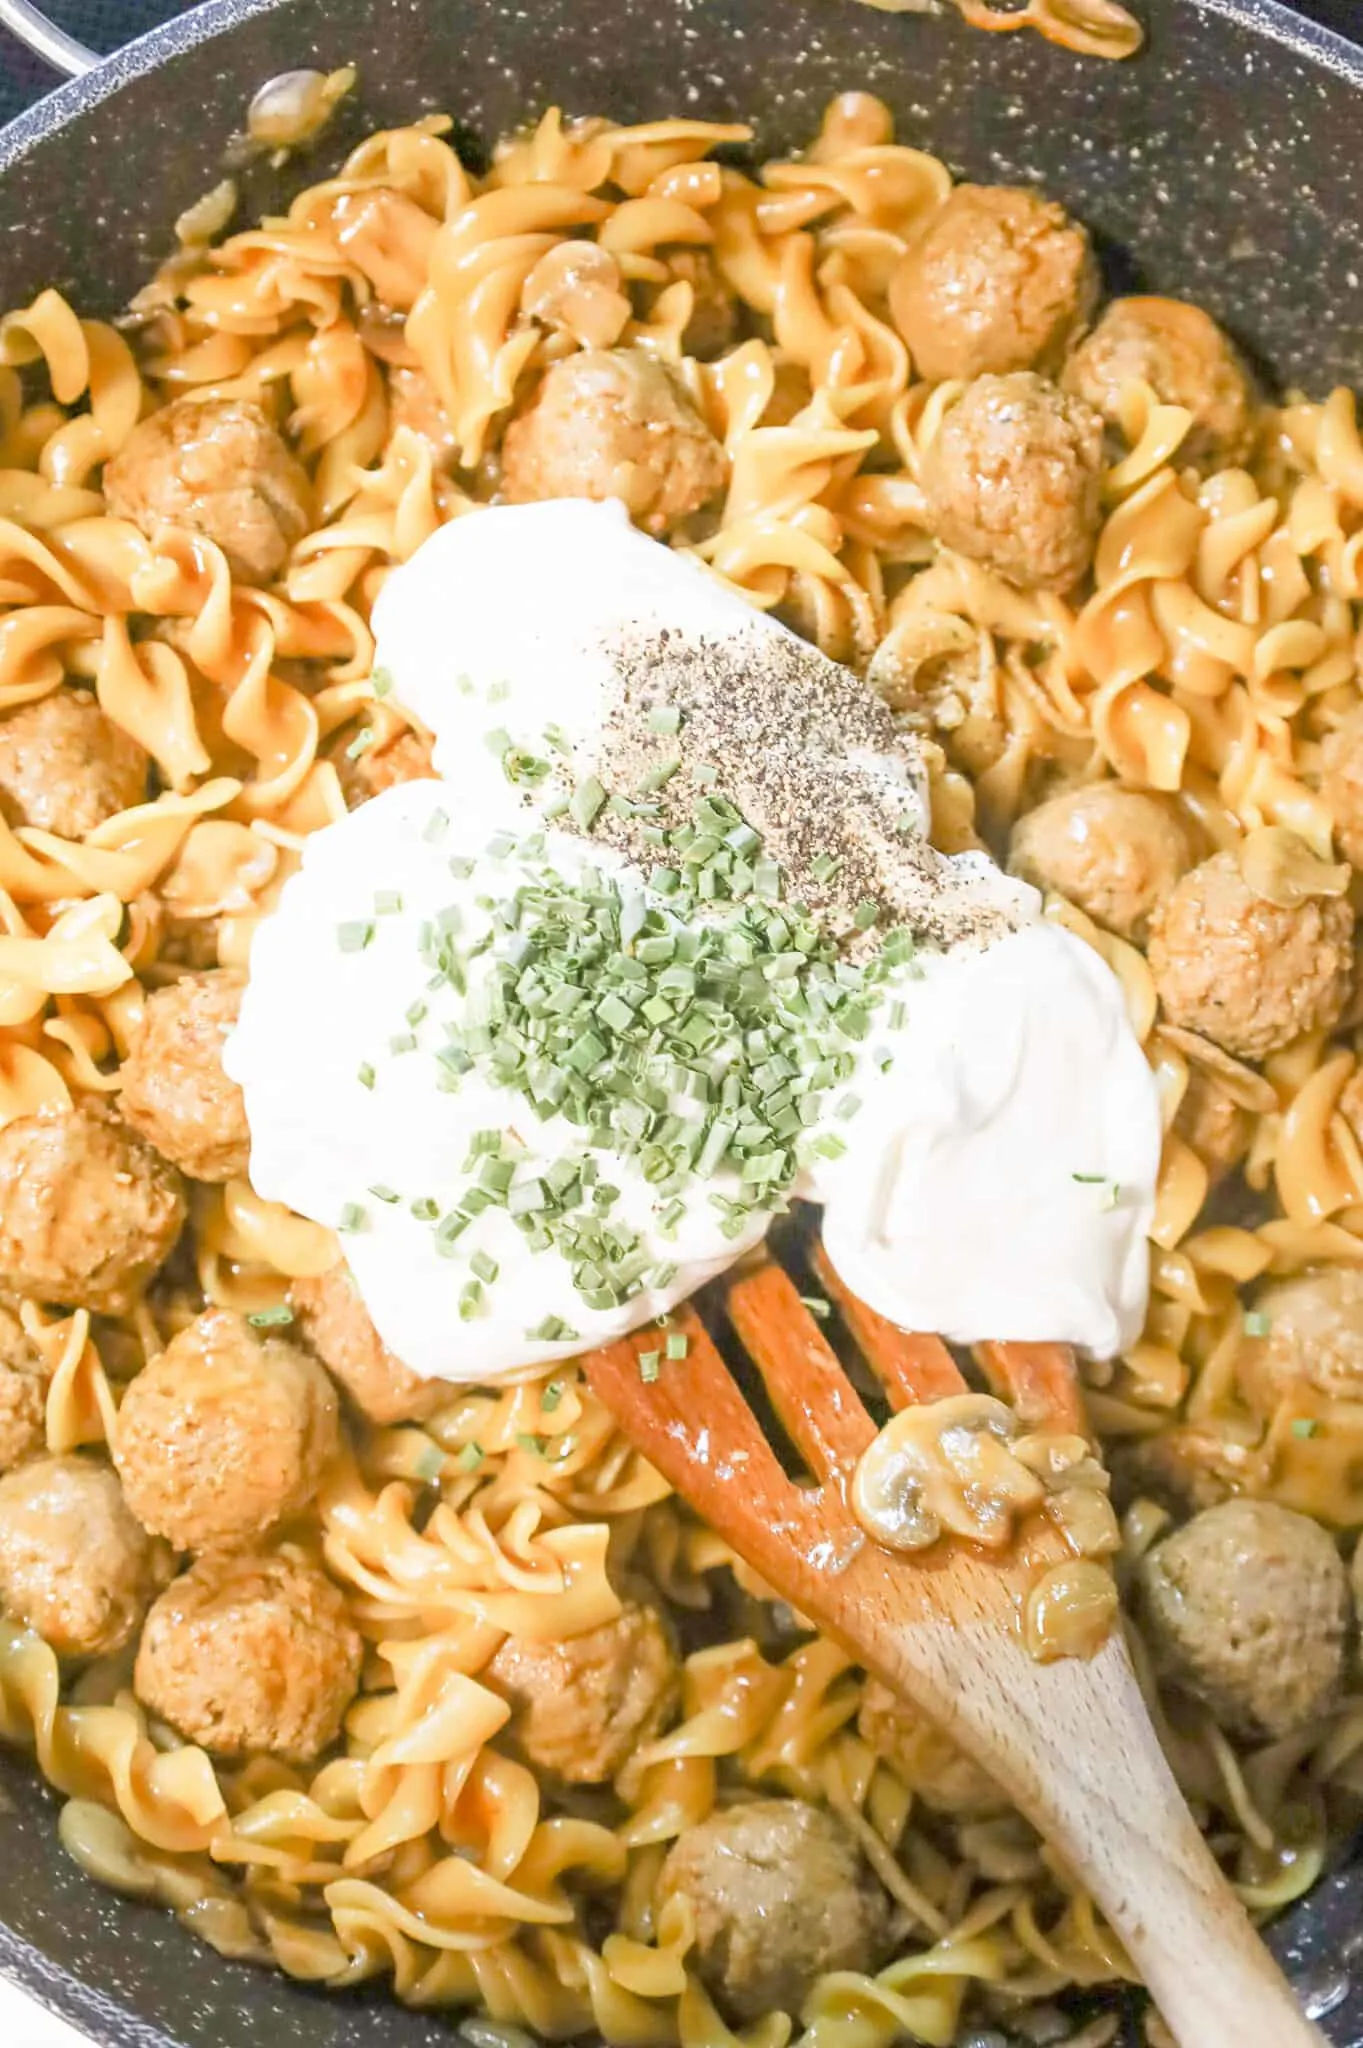 sour cream, salt, pepper and chopped chives on top of meatballs and egg noodles in a skillet